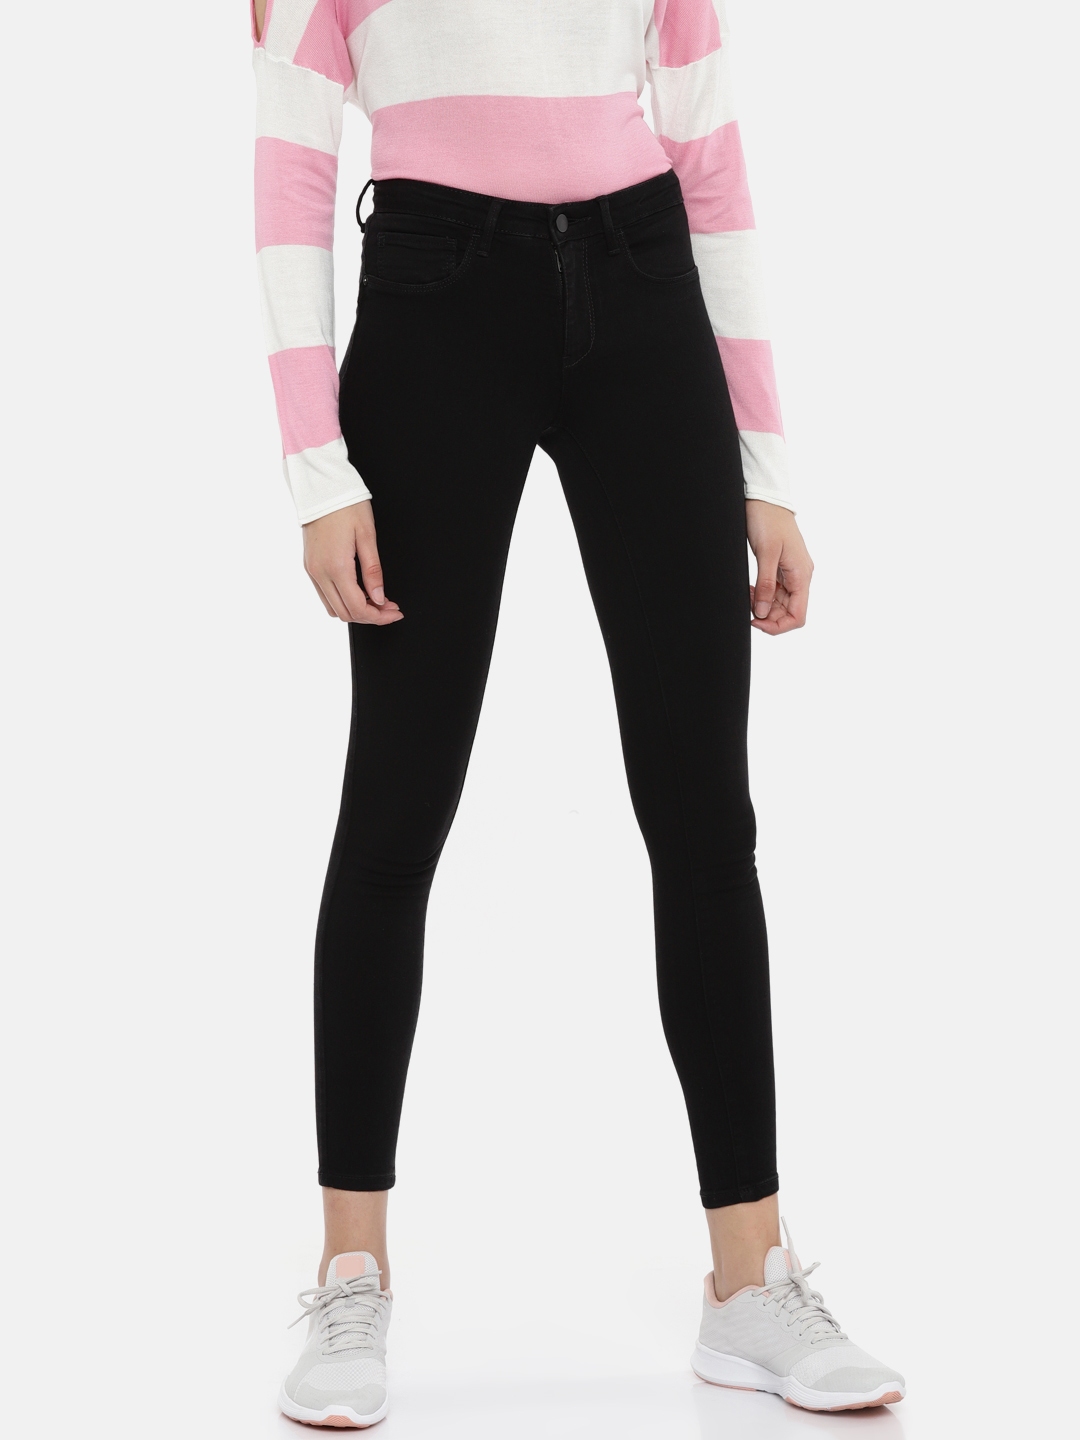 Buy ONLY Women Black Solid Cropped Jeggings - Jeggings for Women 4424643